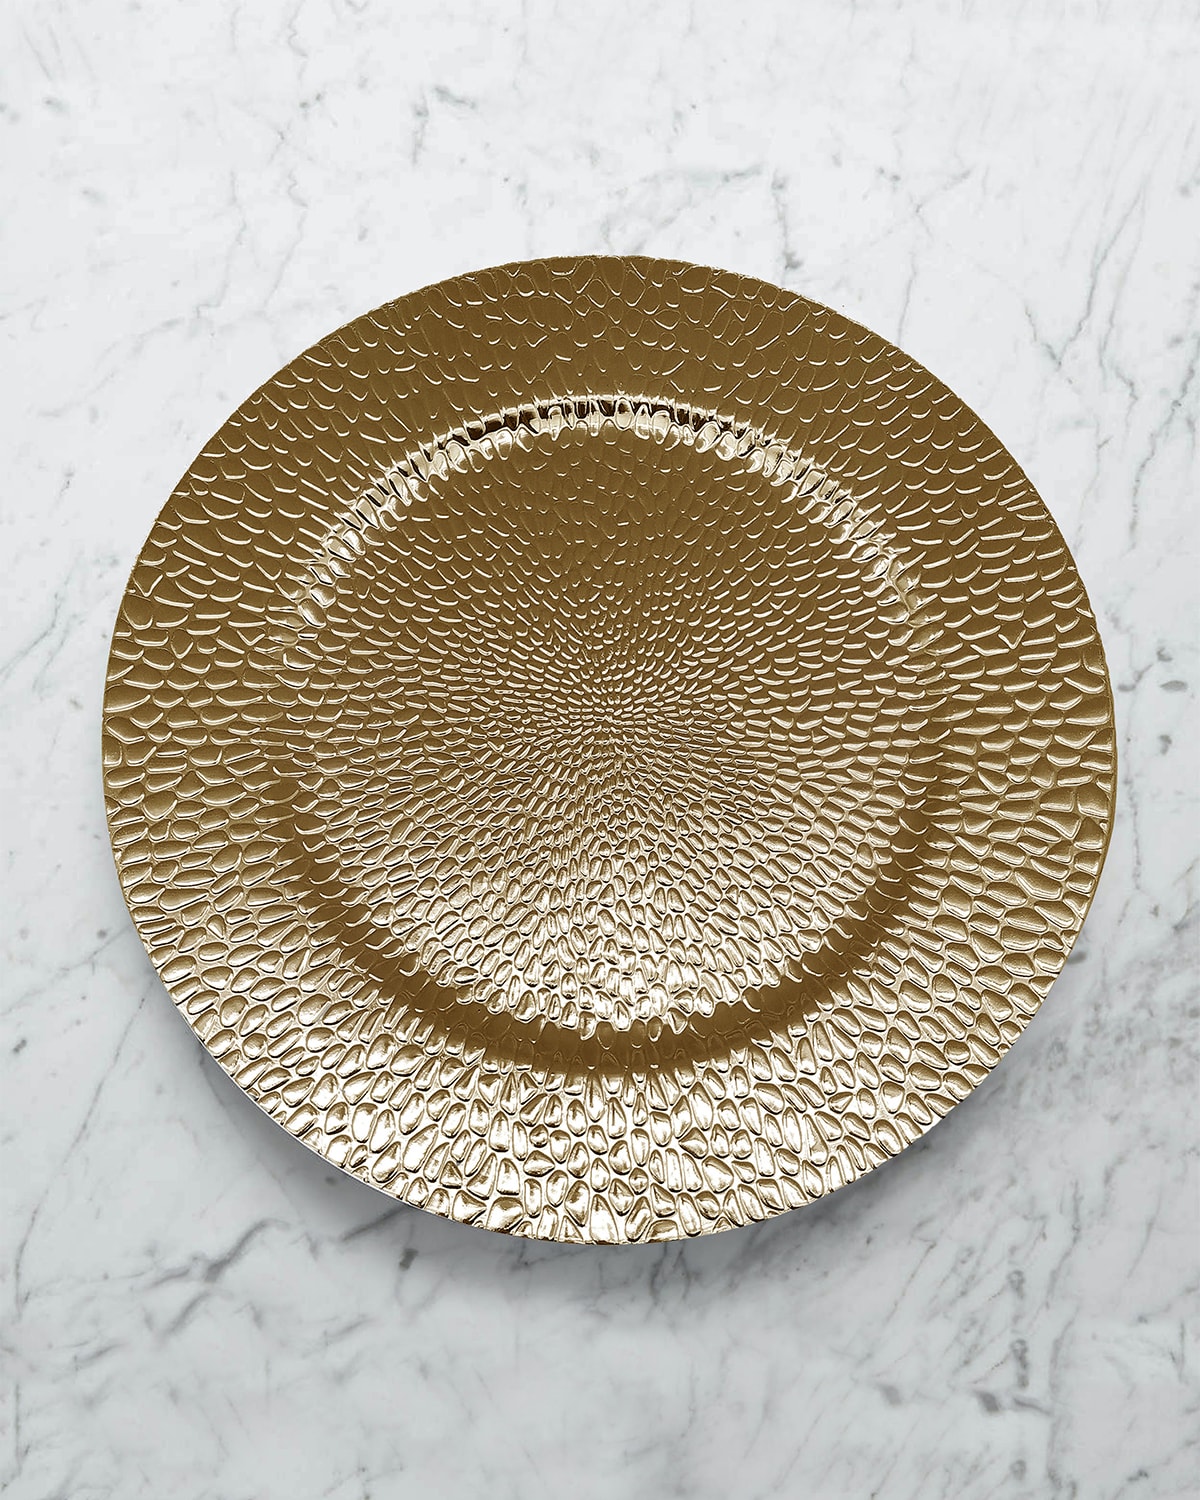 American Atelier Raindrops Electroplated Charger Plates, Set Of 4